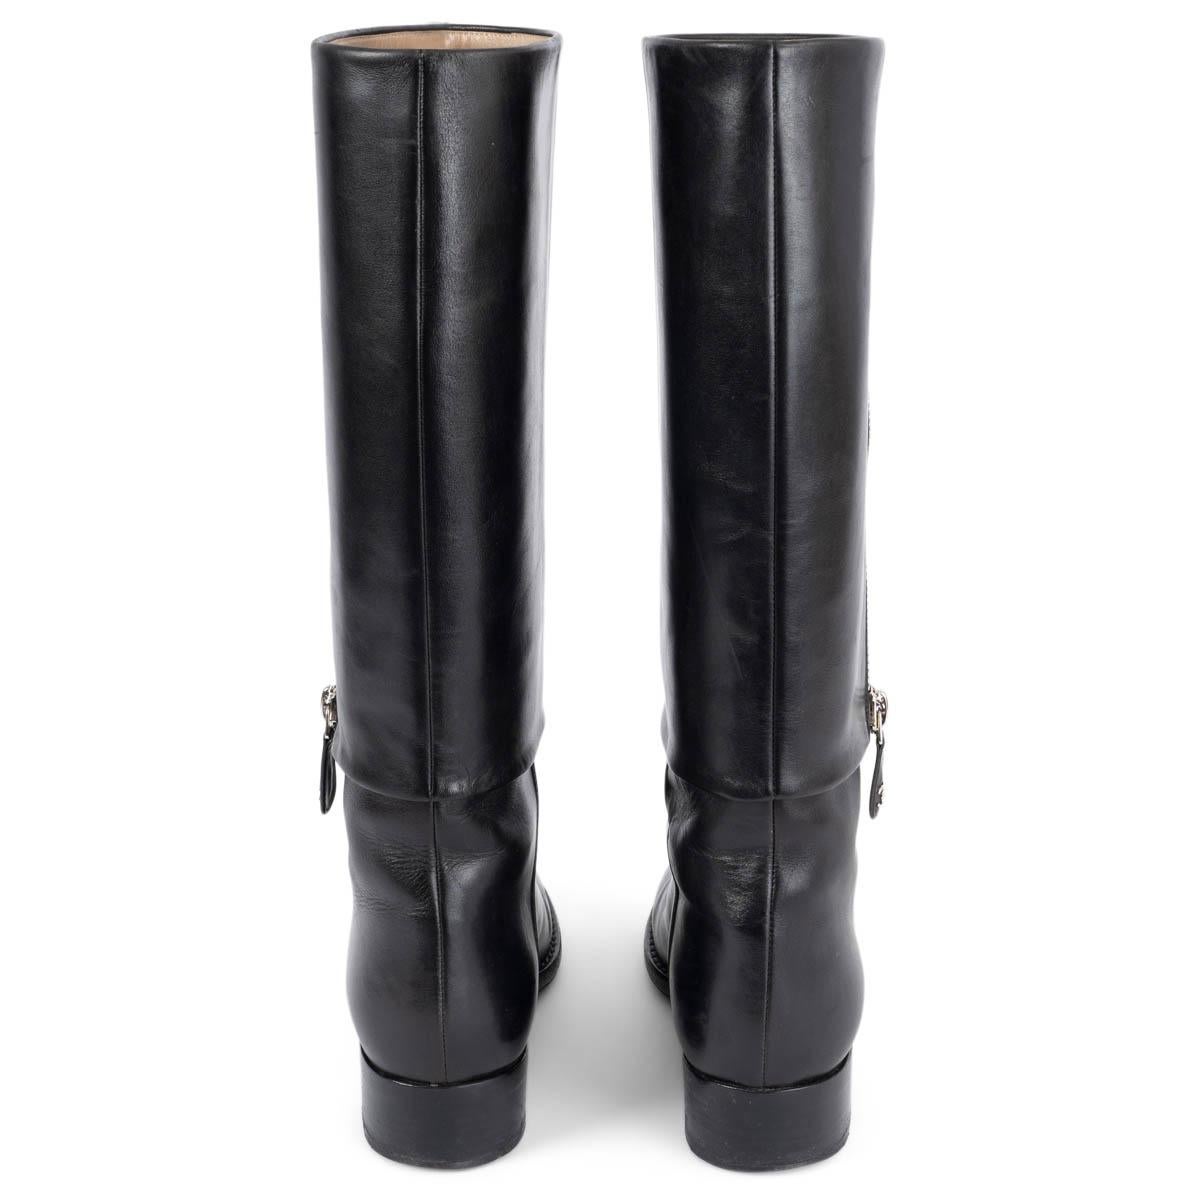 CHANEL black leather 2012 12A BOMBAY RIDING Boots Shoes 37 fit 36 1